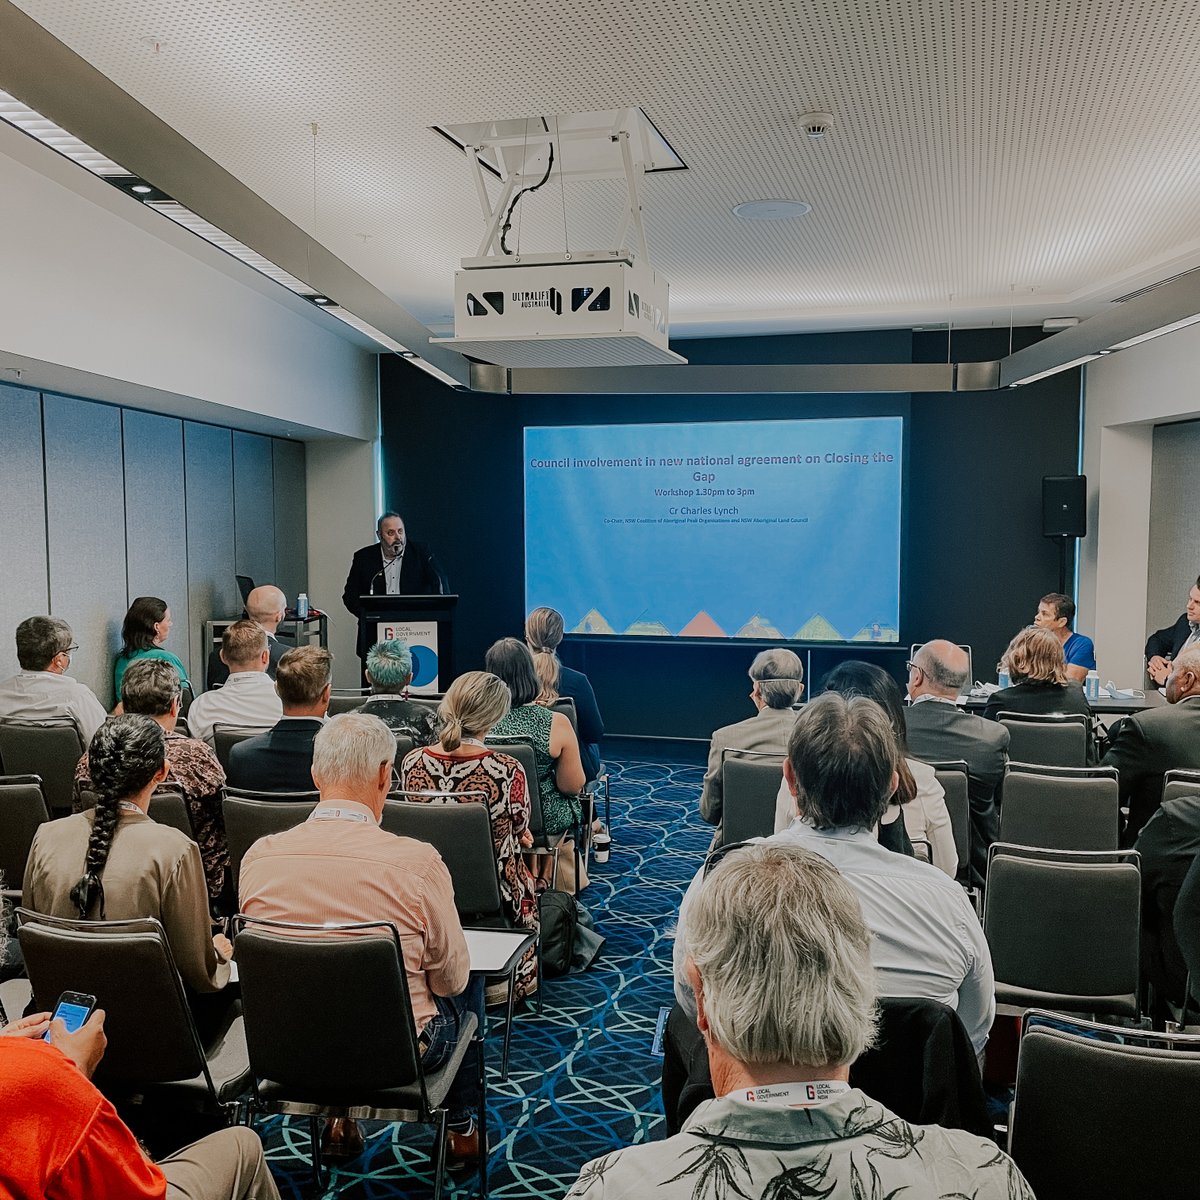 In session now 🗨️ Council involvement in new national agreement on Closing the Gap. 

Panel Speakers: NSW Coalition of Aboriginal Peak Organisations, @nswalc @NSWRC

#LGNSWConference #LGNSWEvents